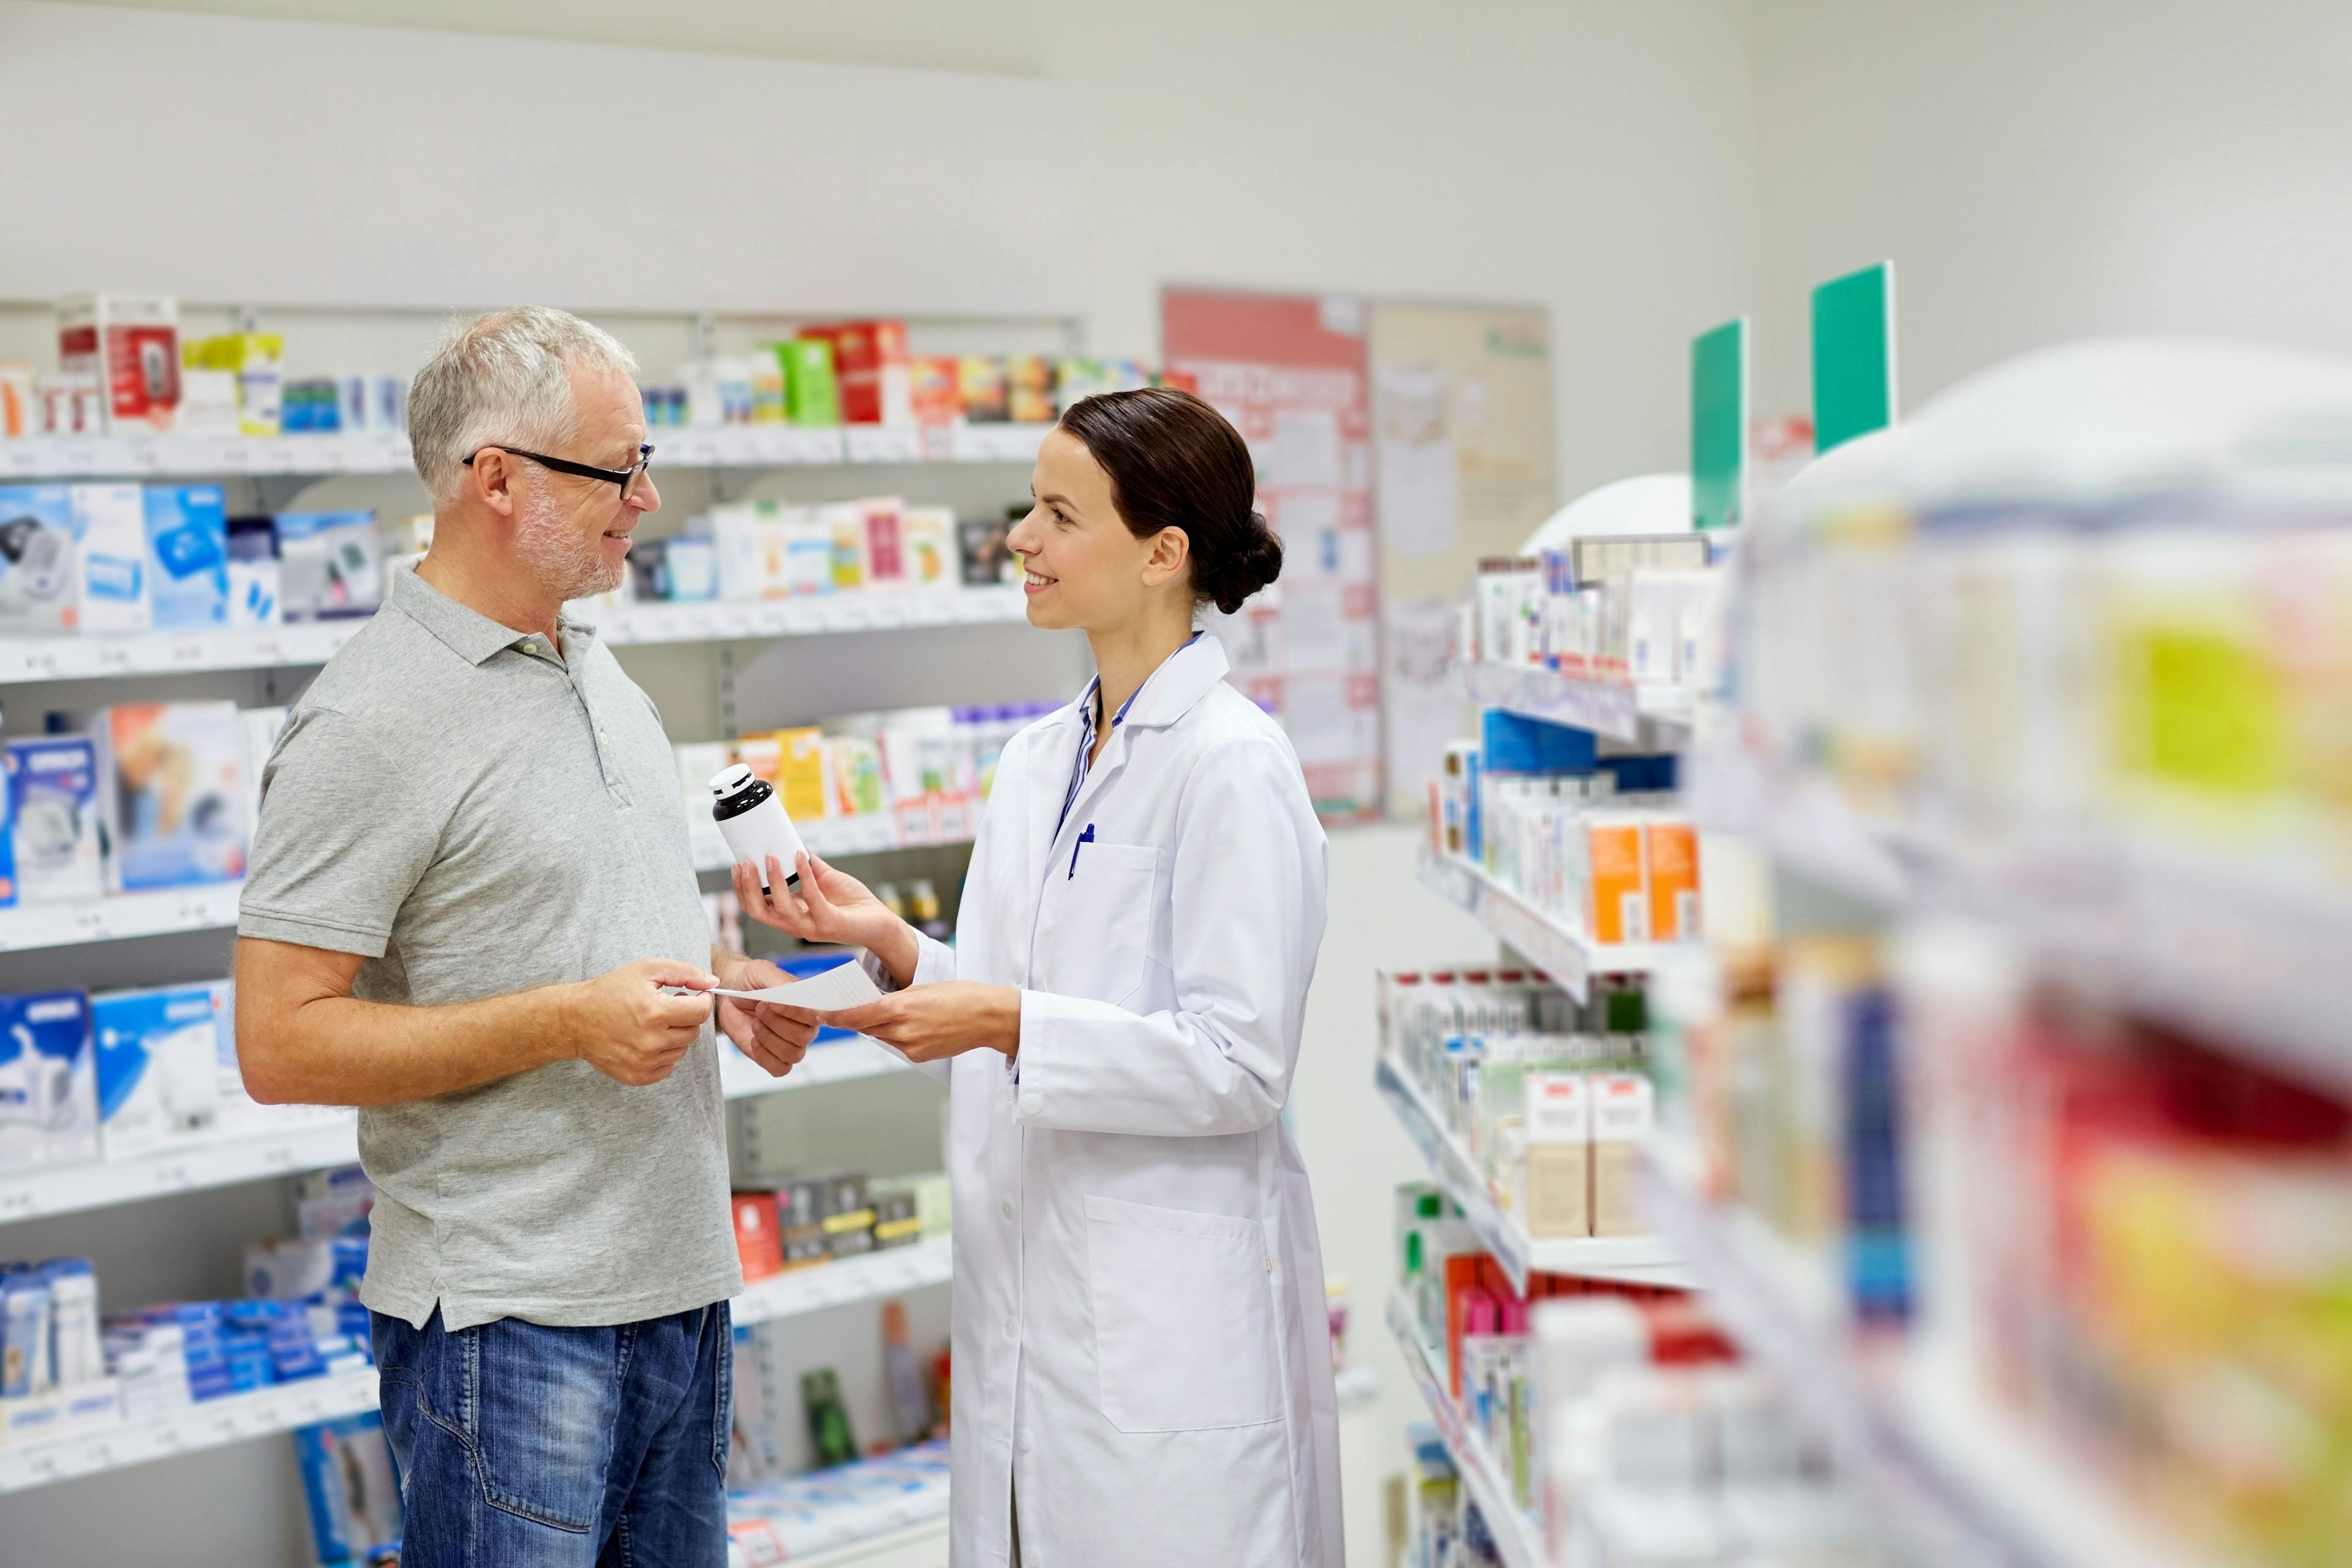 Implementing Services into Community Pharmacy Workflow Presents Challenges